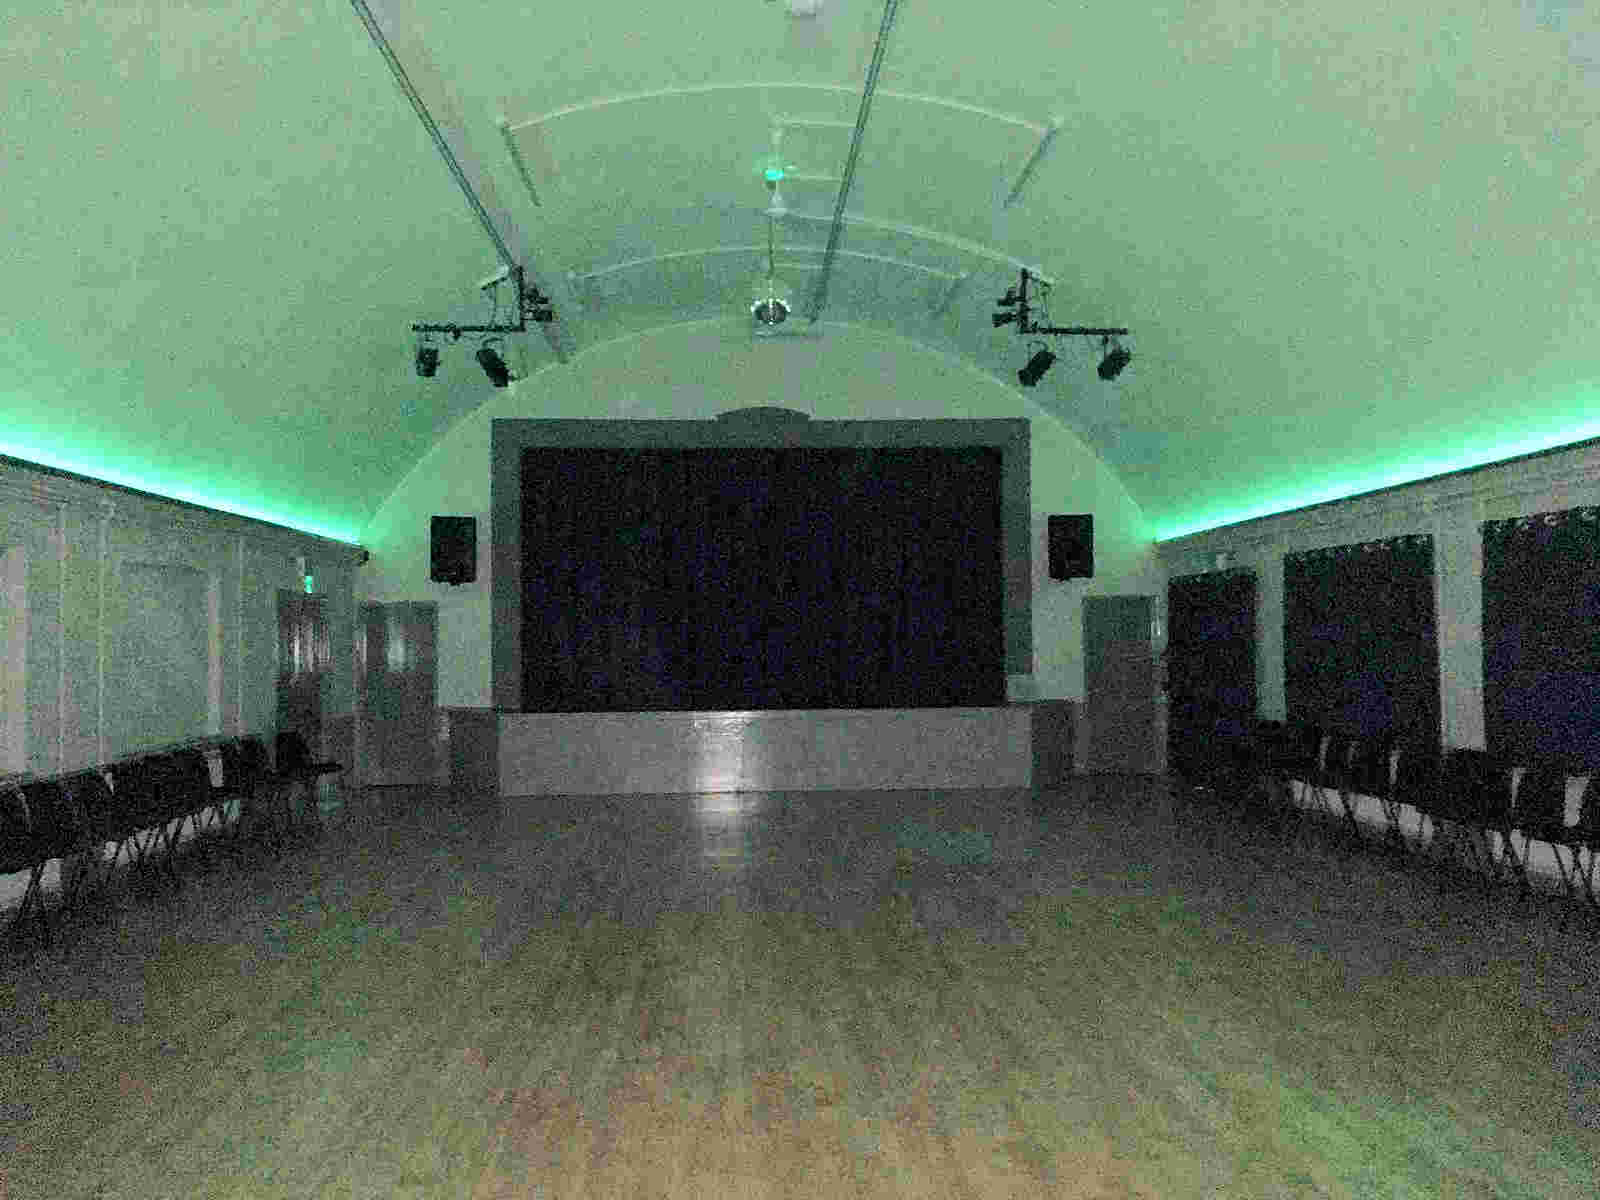 Sawley Memorial Hall and Commuity Centre- after refurbishment October 2018